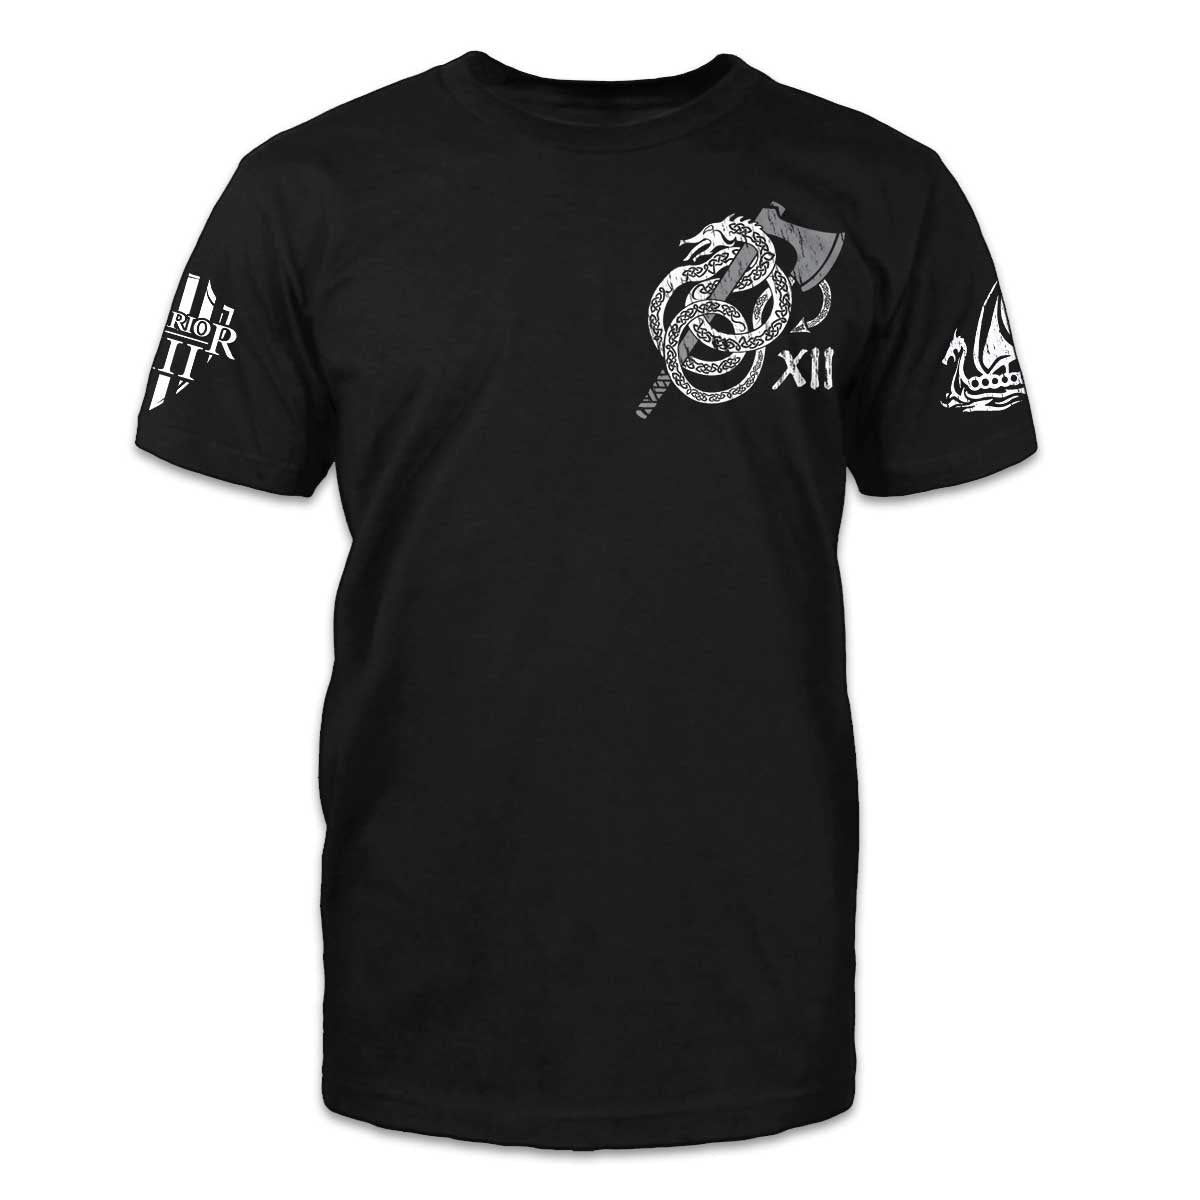 A black t-shirt with a axe and sea serpent wrapped around it printed on the front of the shirt.